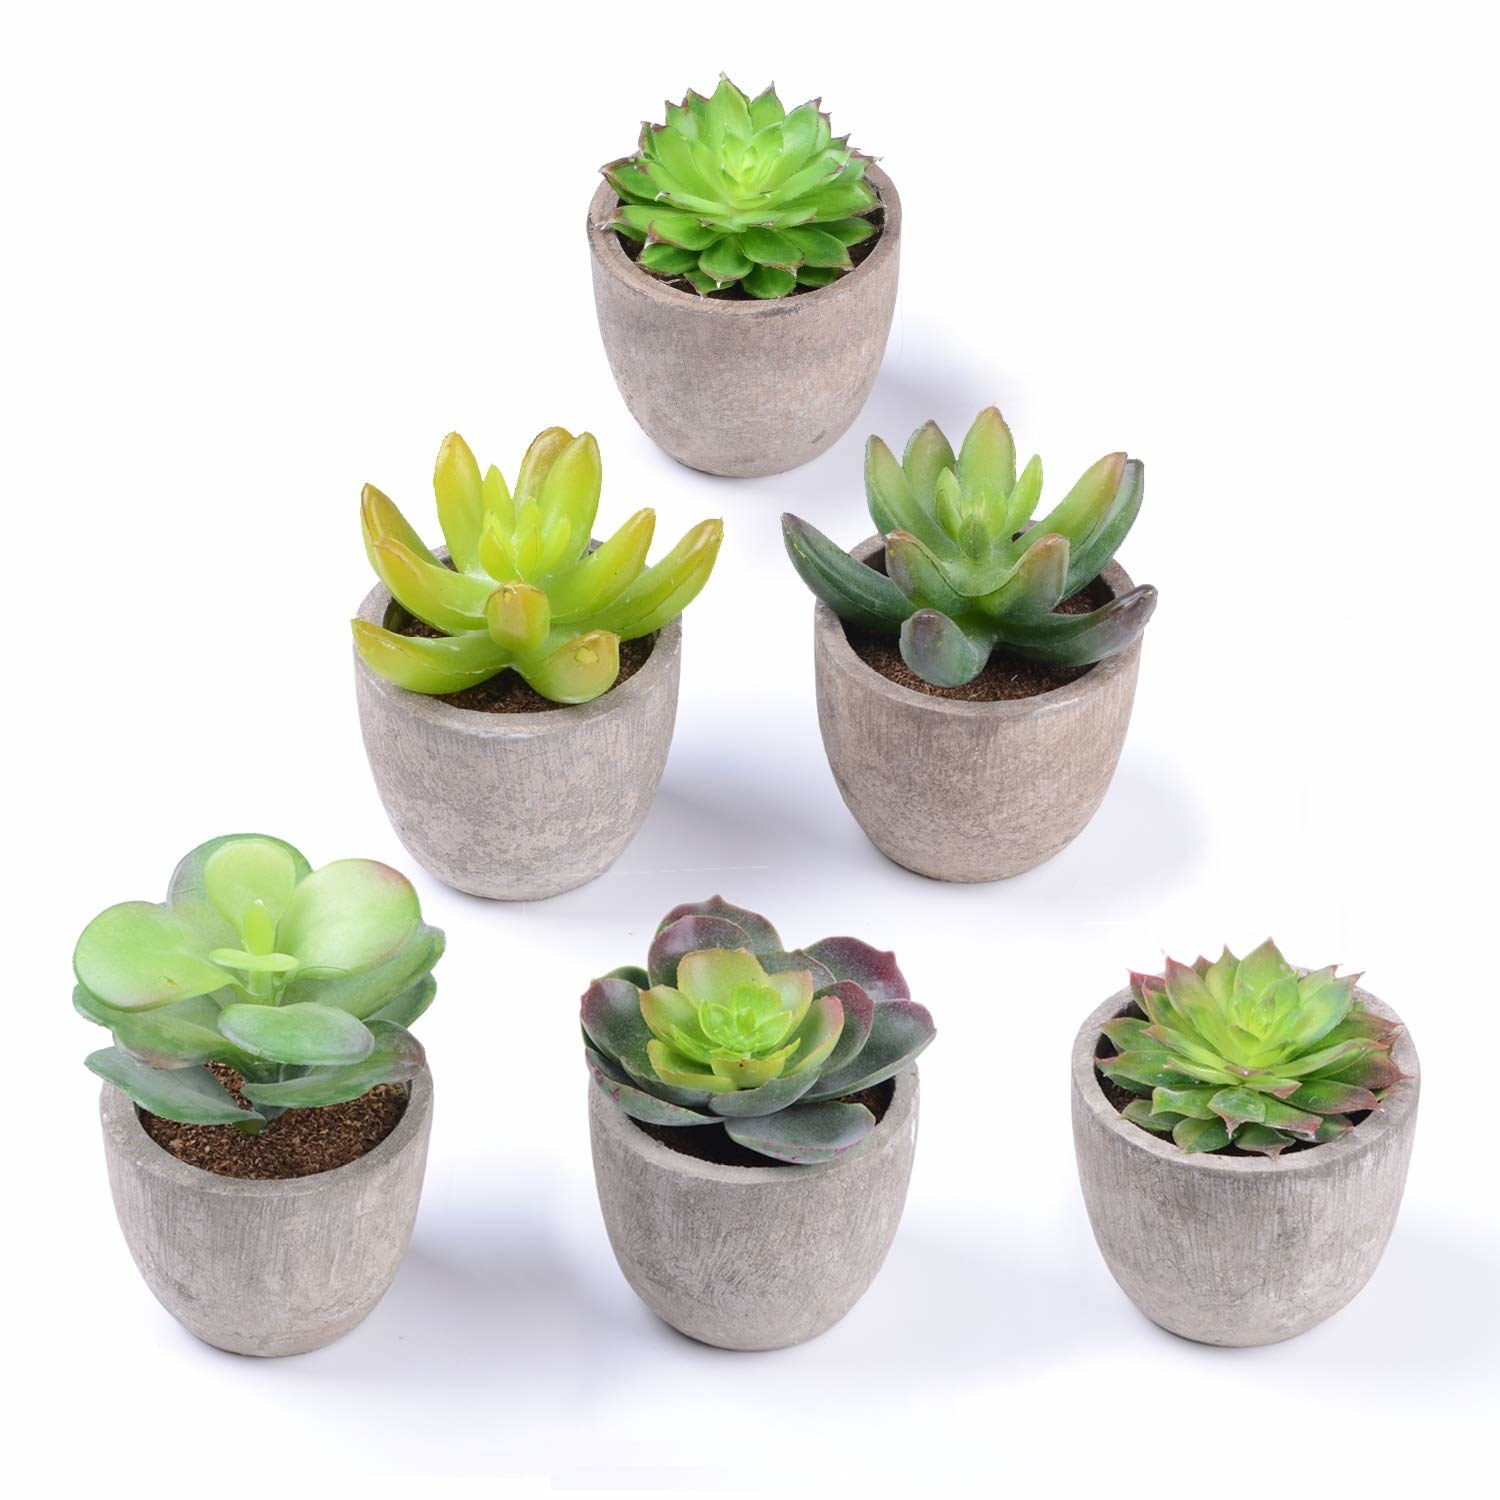 An image of six faux succulent plants in gray pots